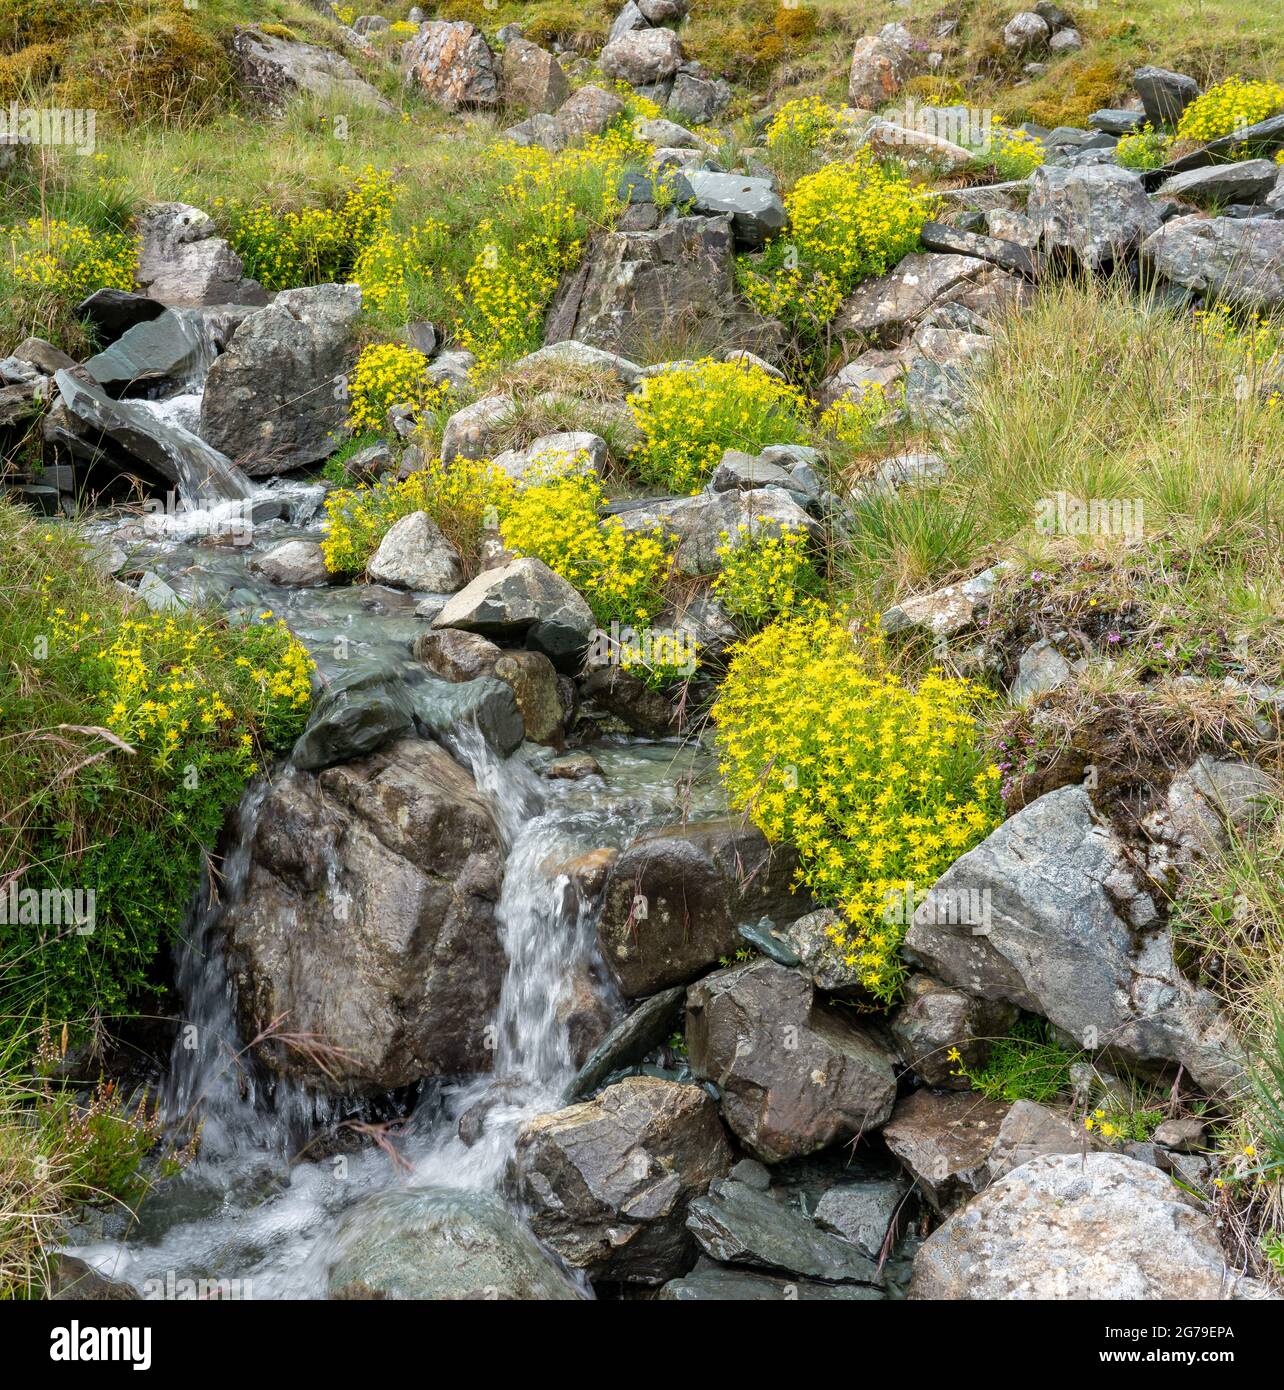 Yellow Saxifrage Saxifraga aizoides growing by a mountain stream at Honister in the English Lake District UK Stock Photo